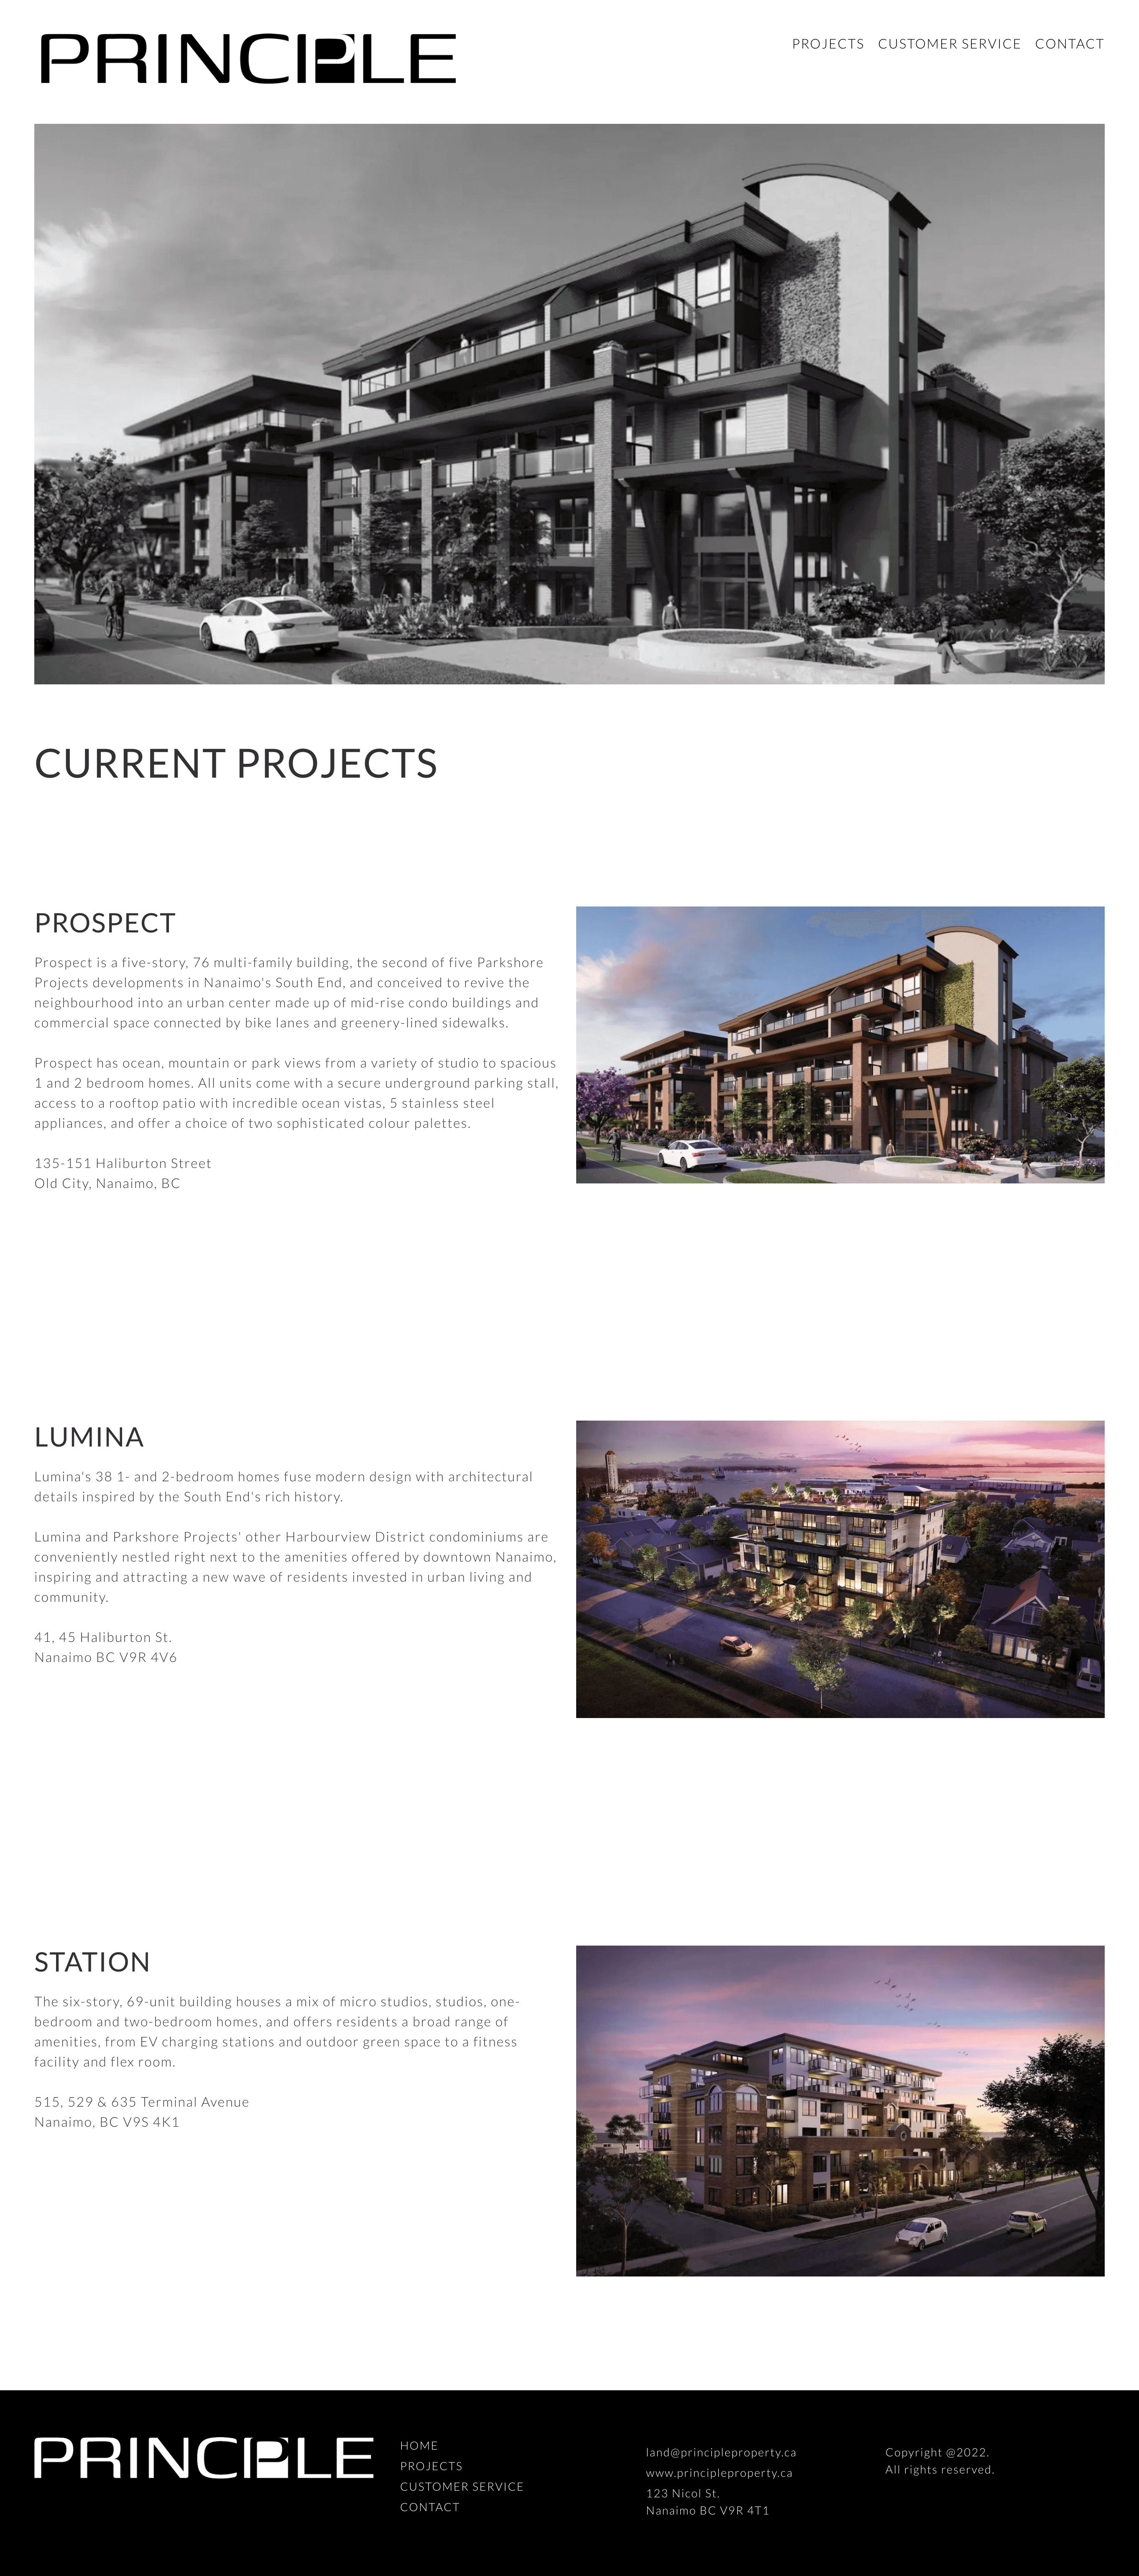 Principle Property Group Ltd. - Current Projects page